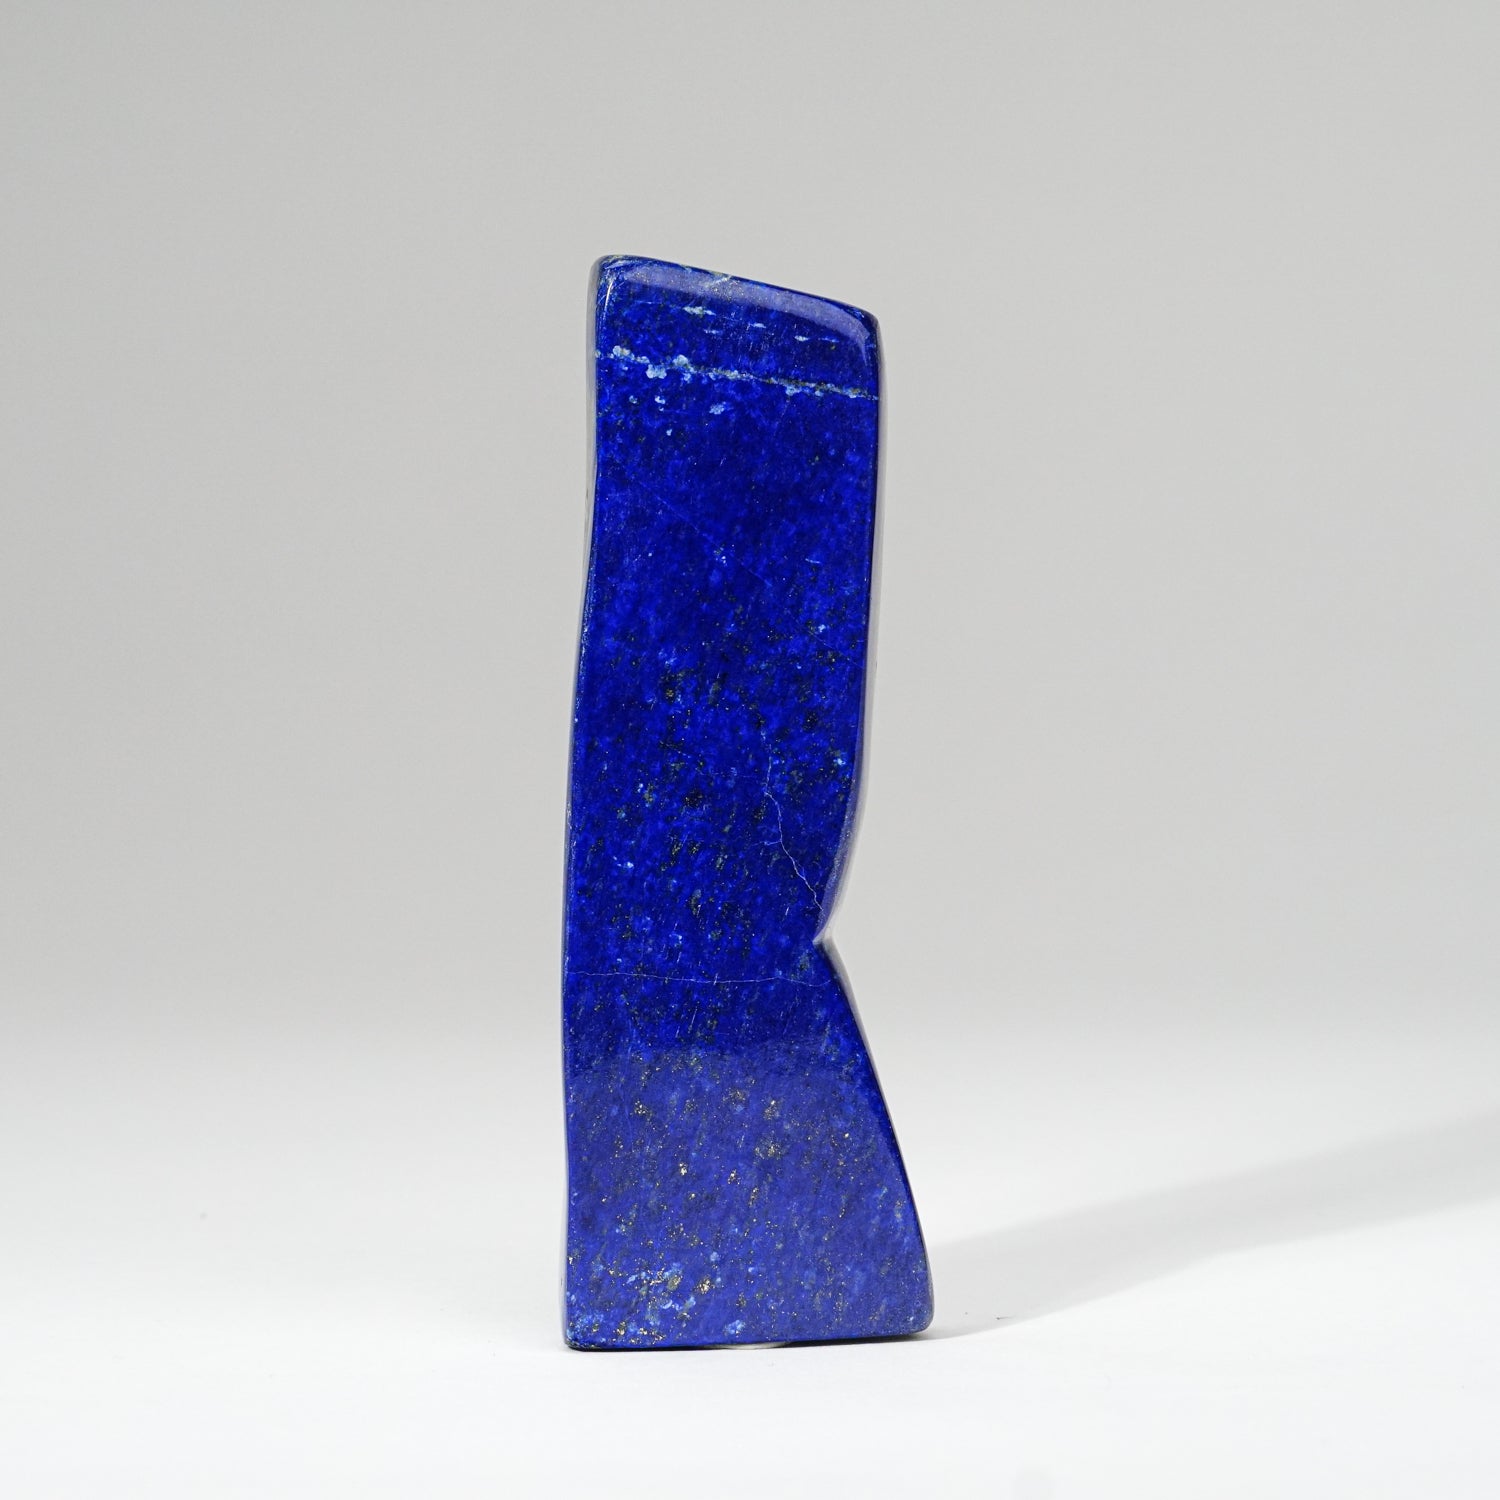 Polished Lapis Lazuli Freeform from Afghanistan (196.4 grams)